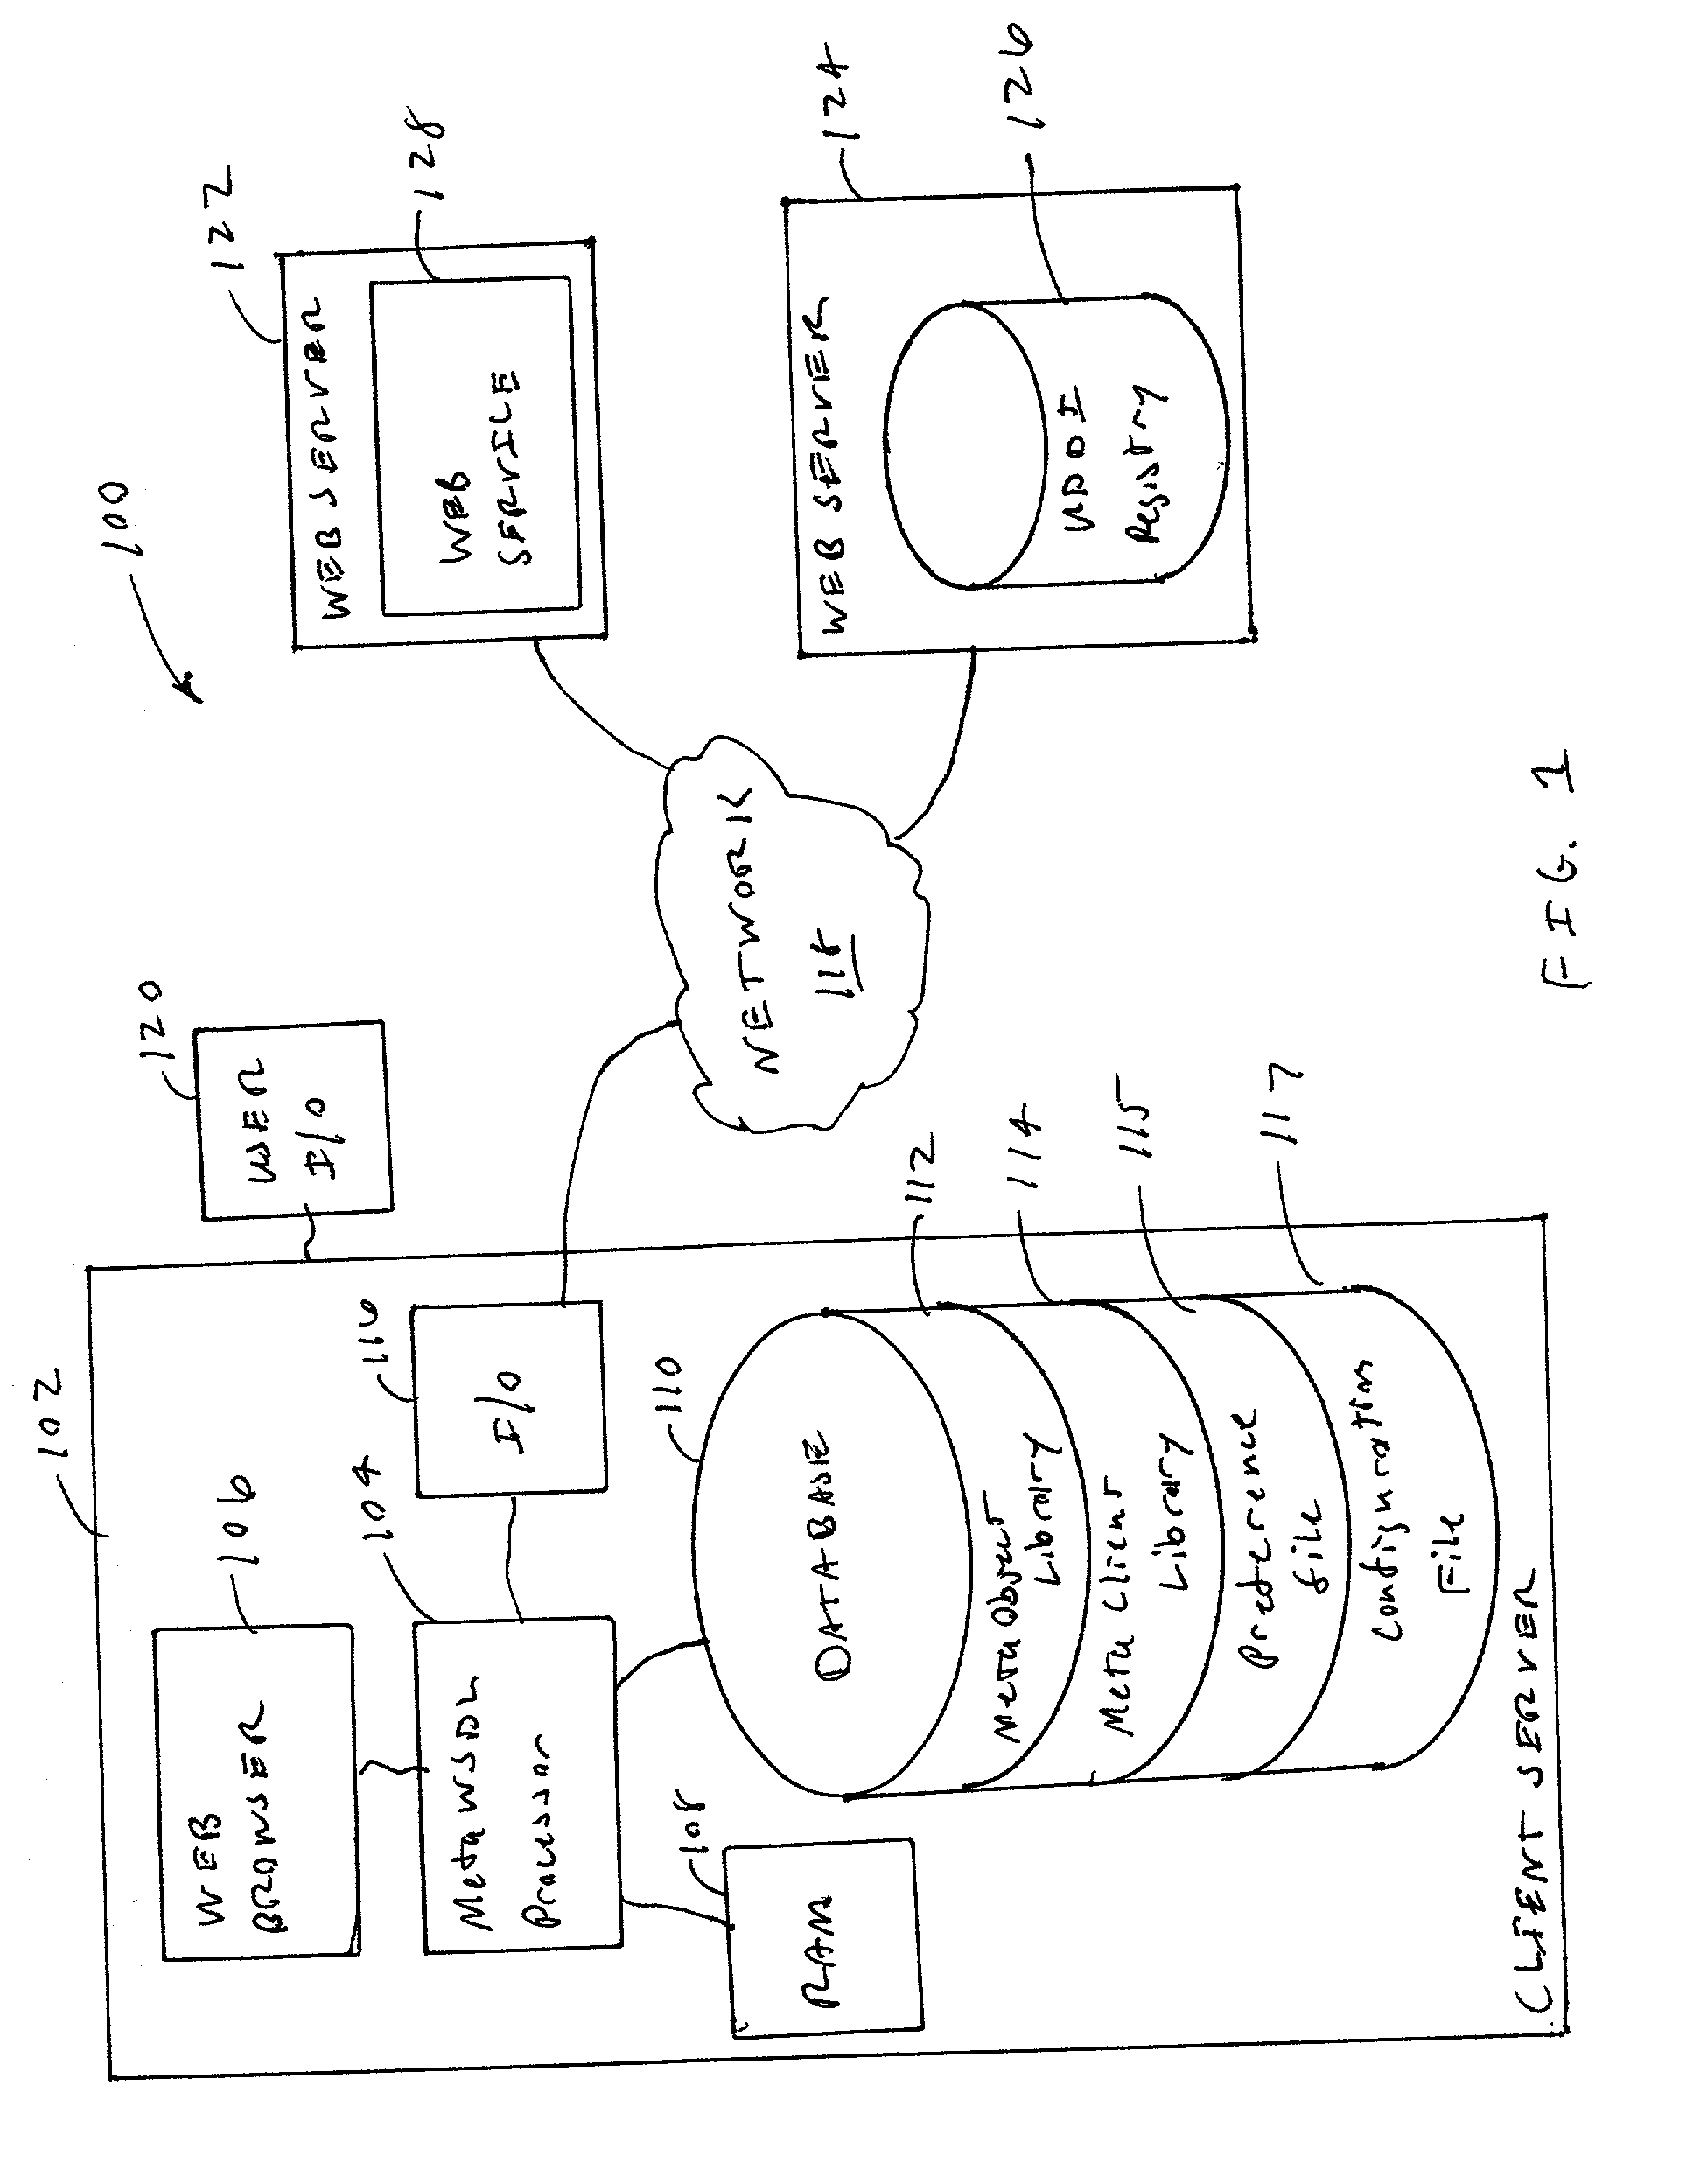 Method and apparatus of automatic method signature adaptation for dynamic web service invocation